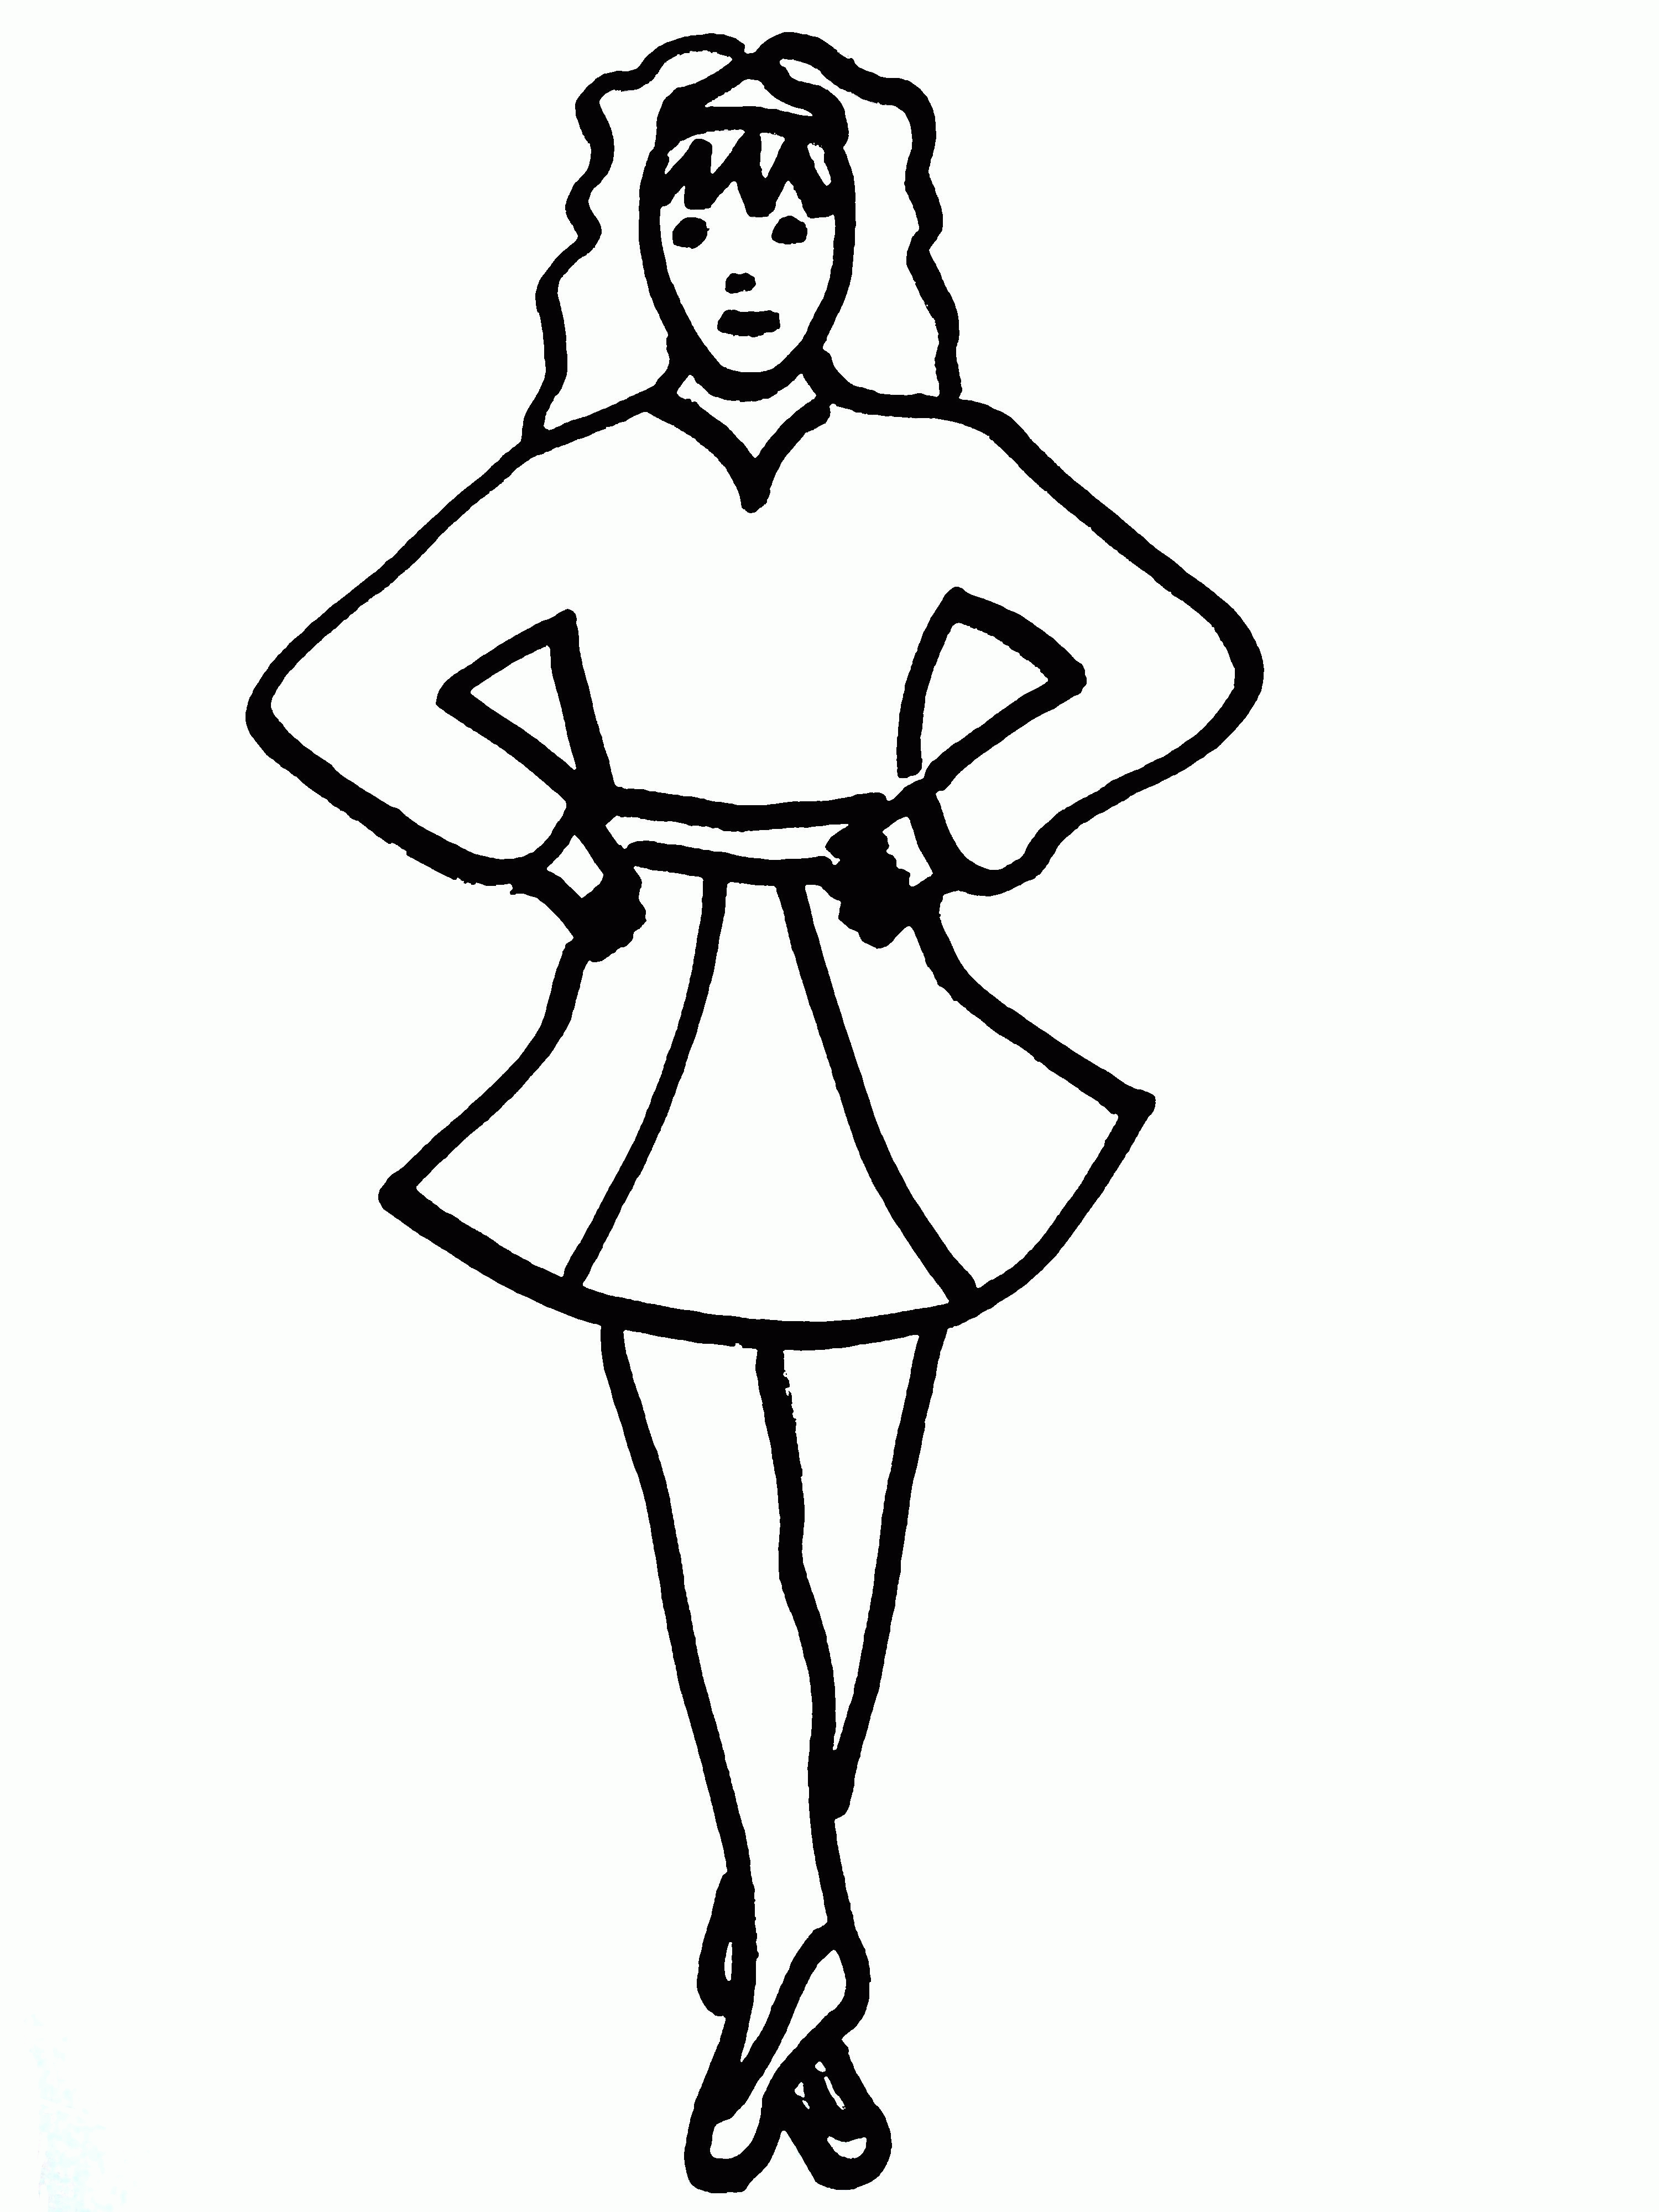 Irish Dancer Coloring Pages - High Quality Coloring Pages